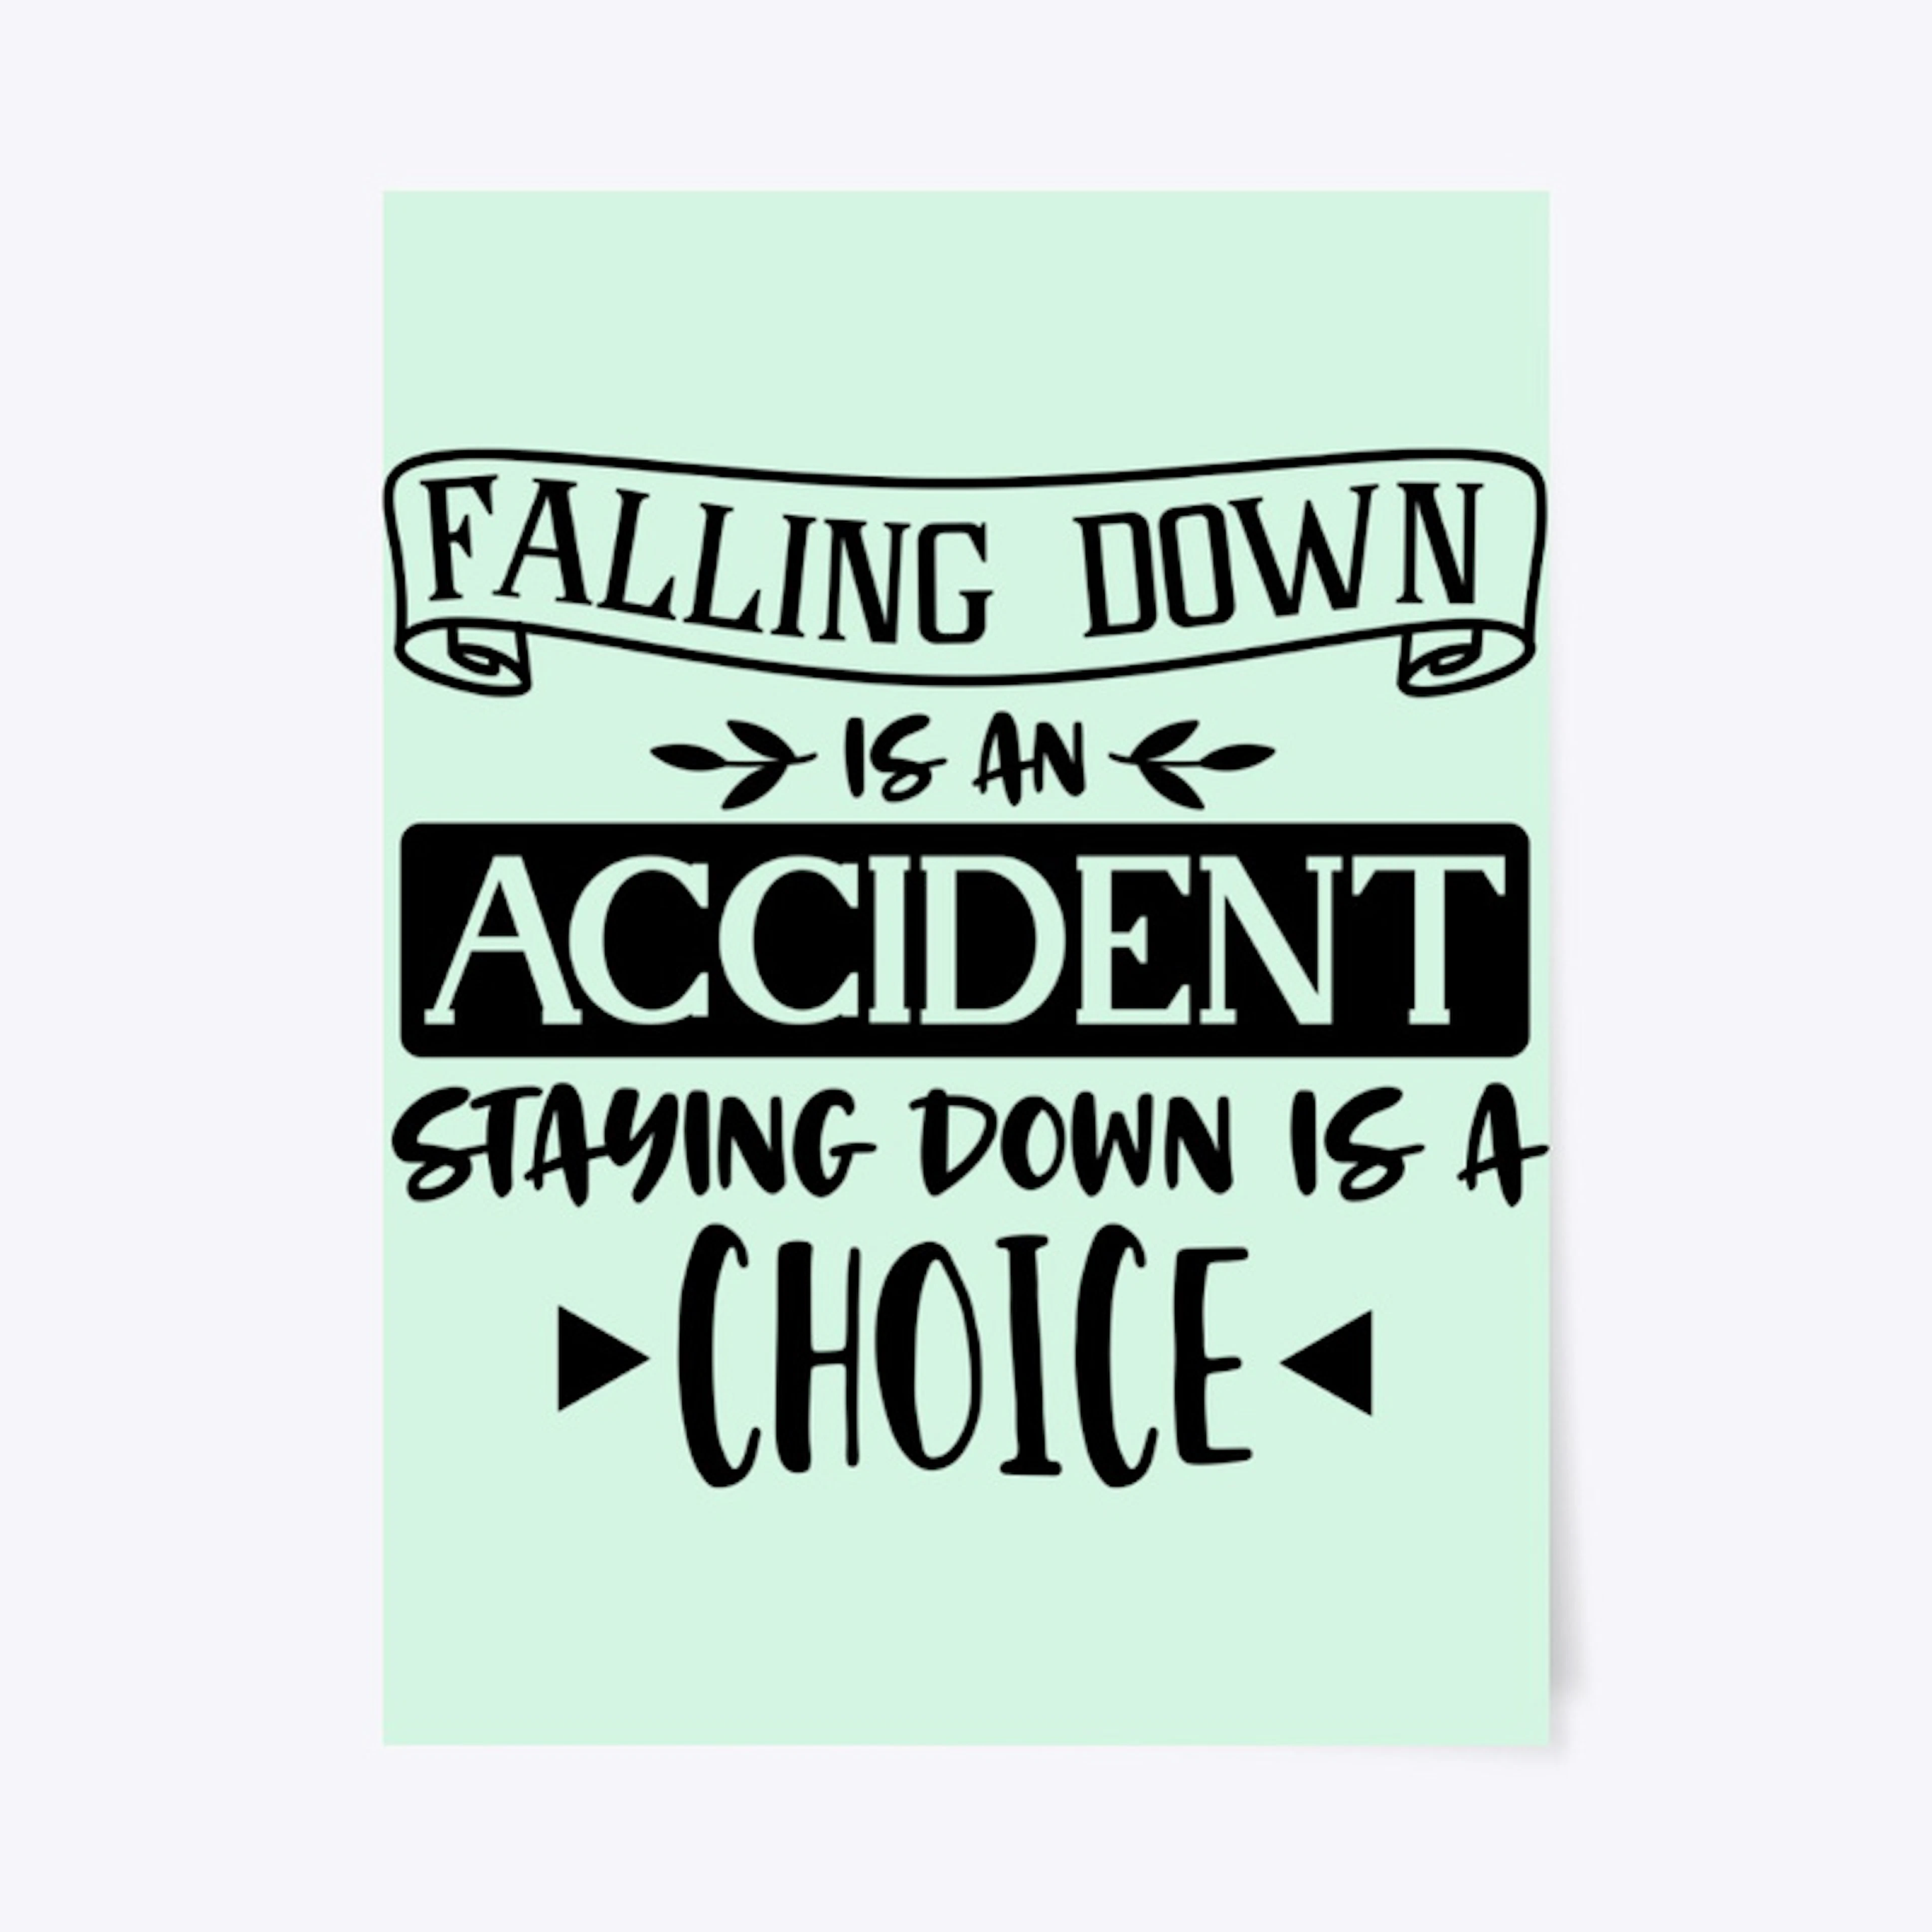 Falling down is an accident